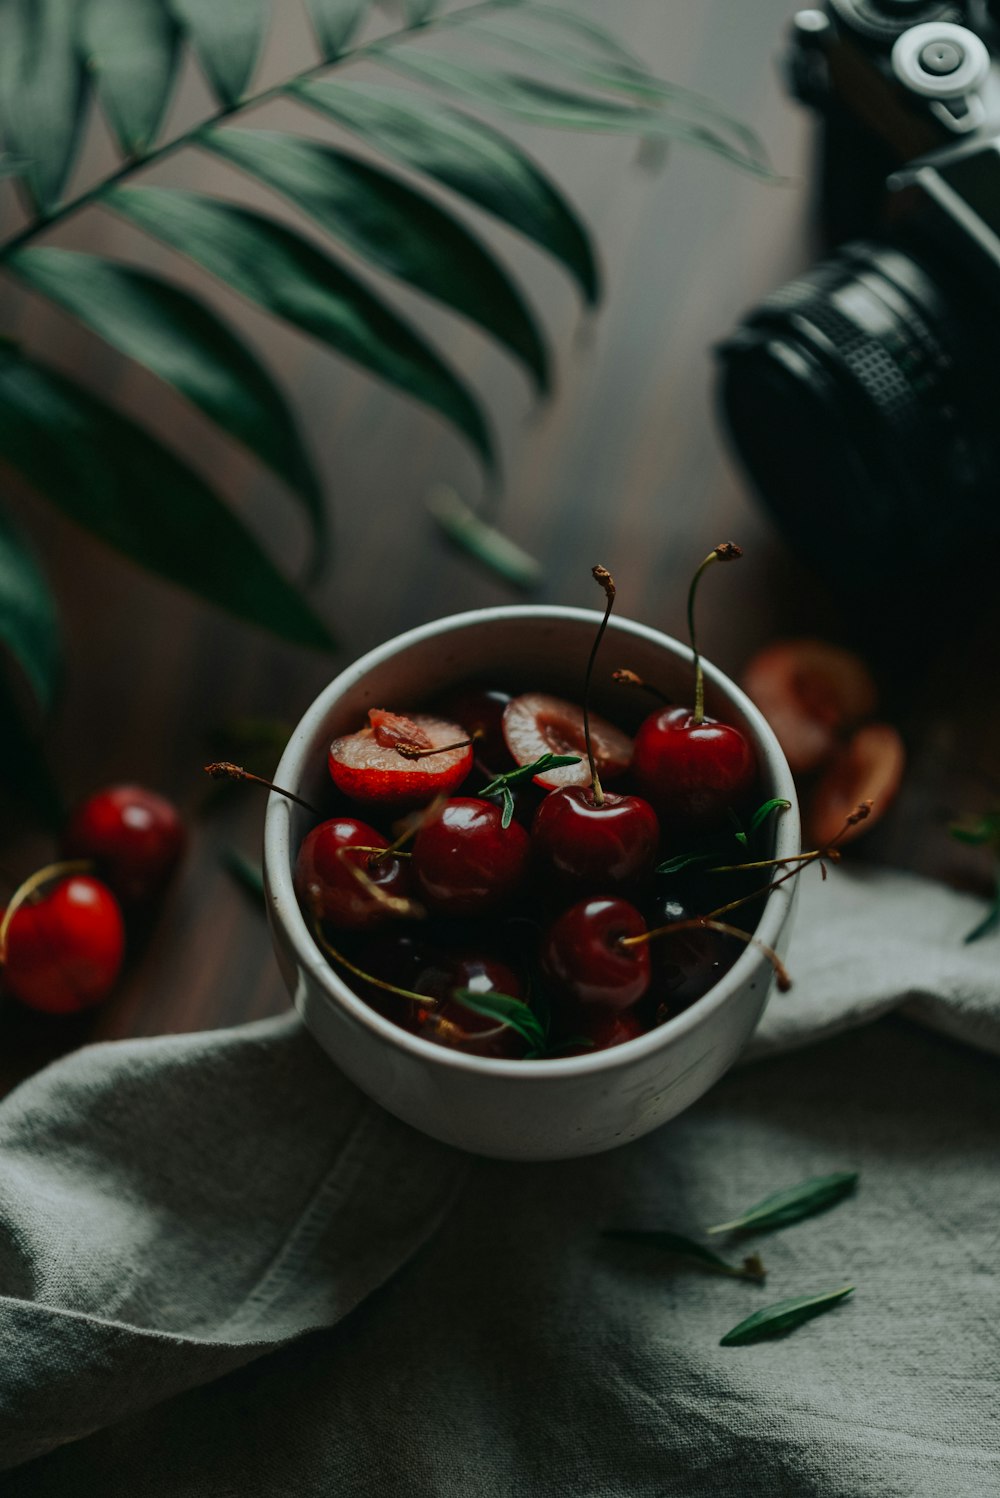 a white bowl filled with cherries next to a camera